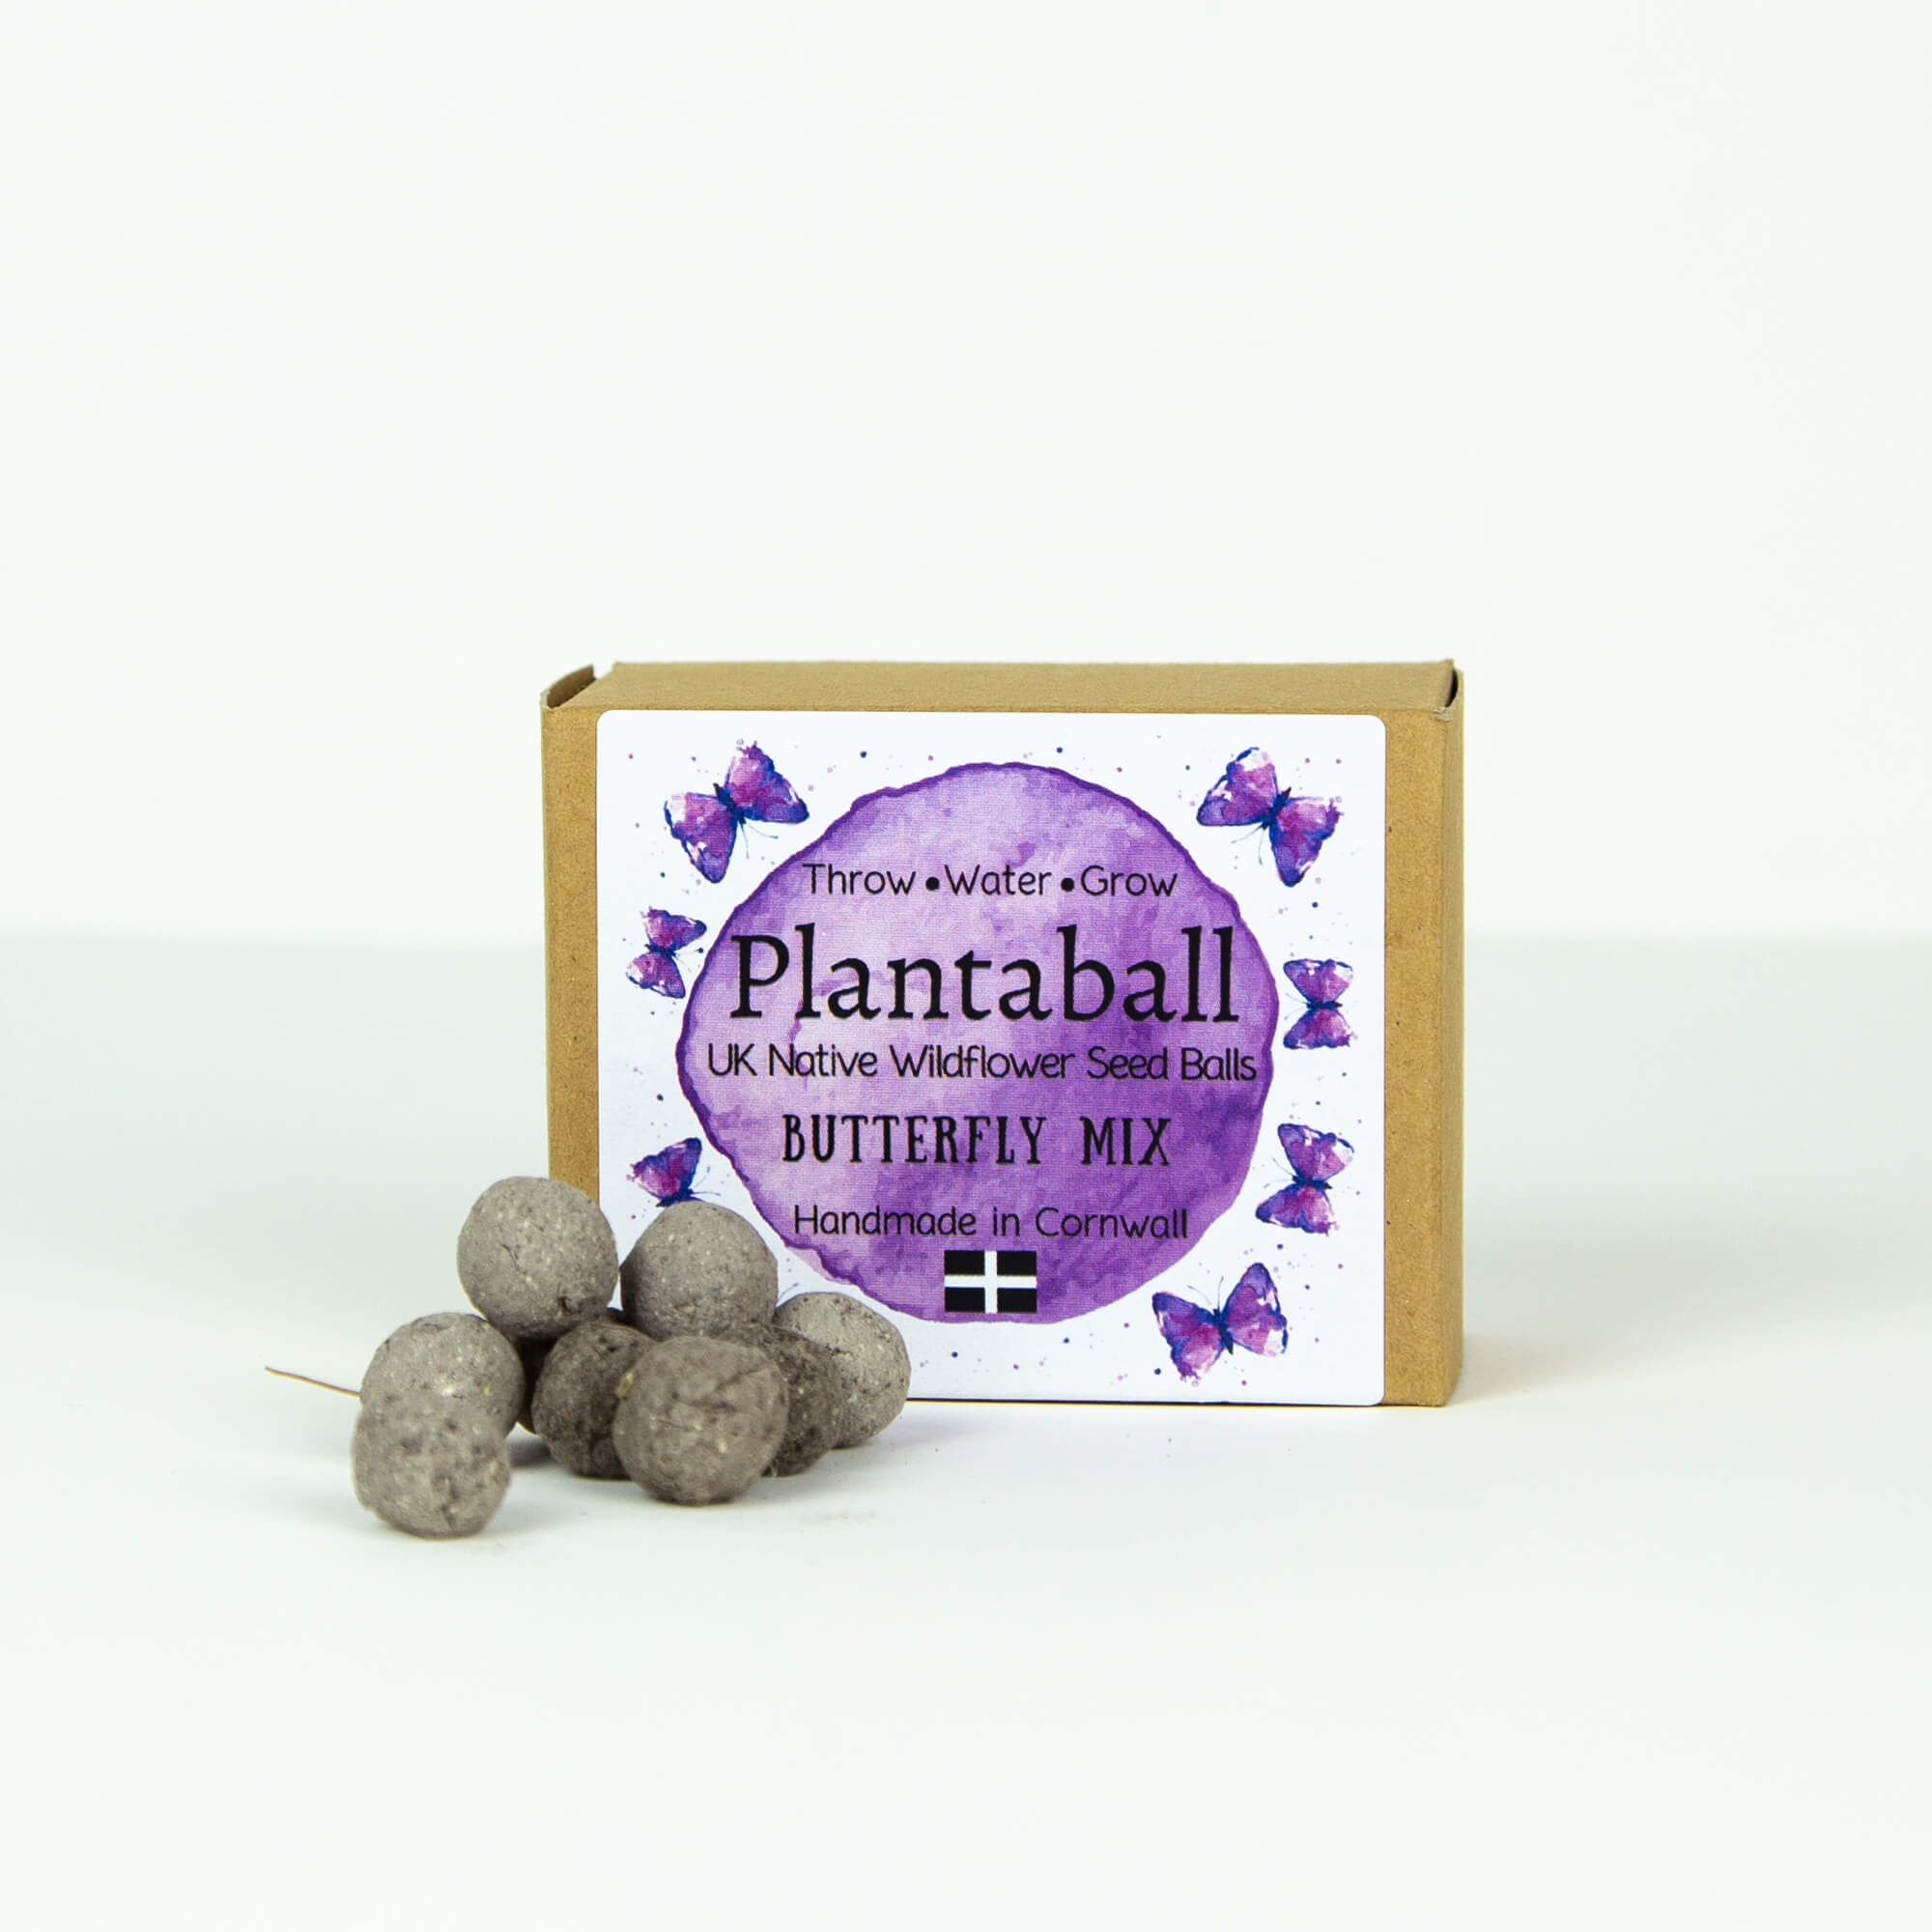 Plantaball Butterfly Mix Gift Box